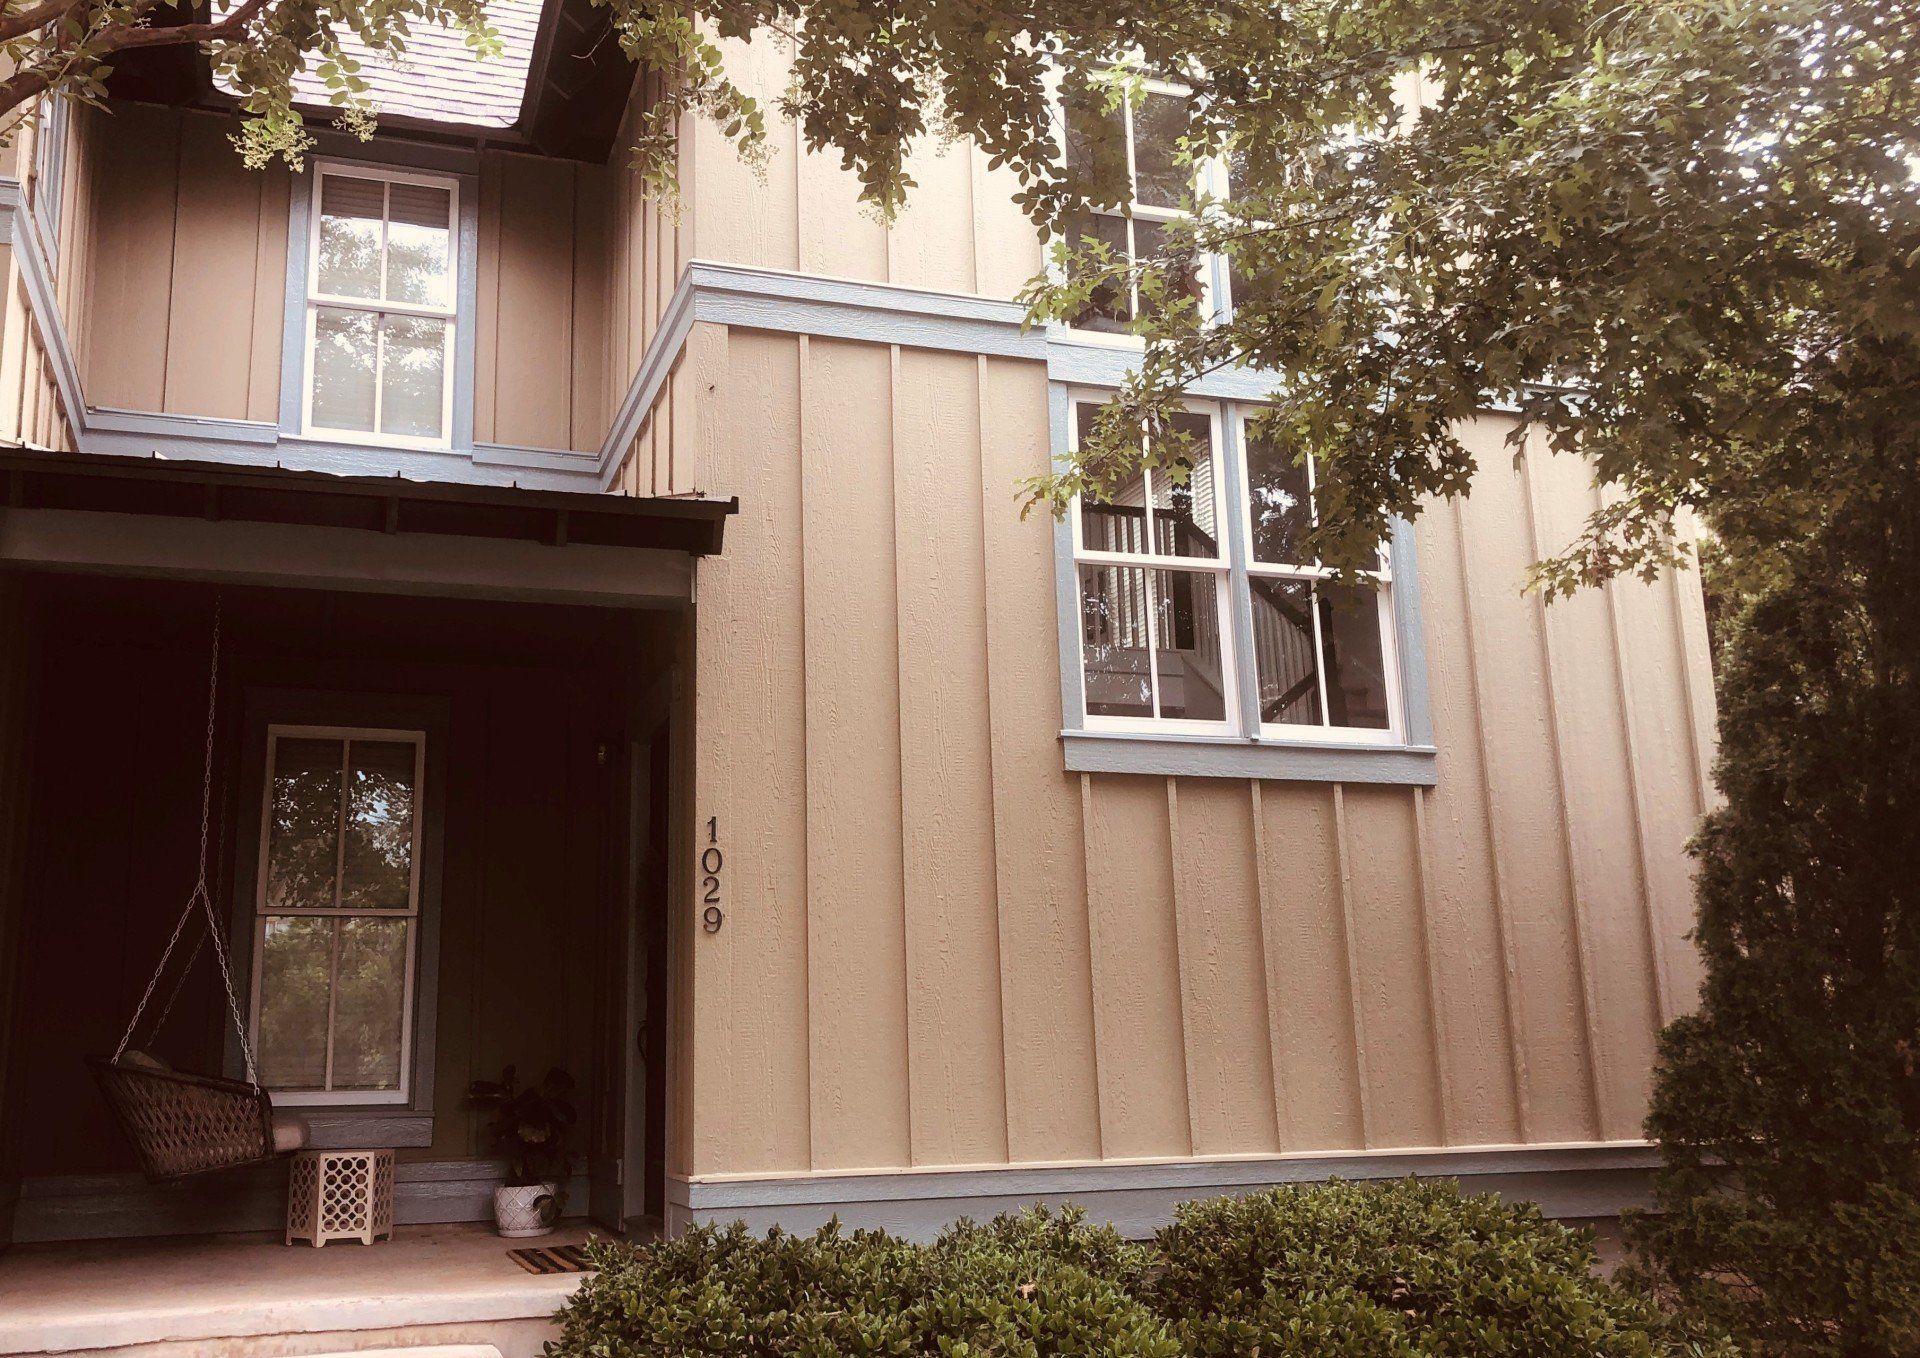 house window tinting in Auburn AL - SPF Residential tint dropped the monthly power costs for this condo in Auburn, AL